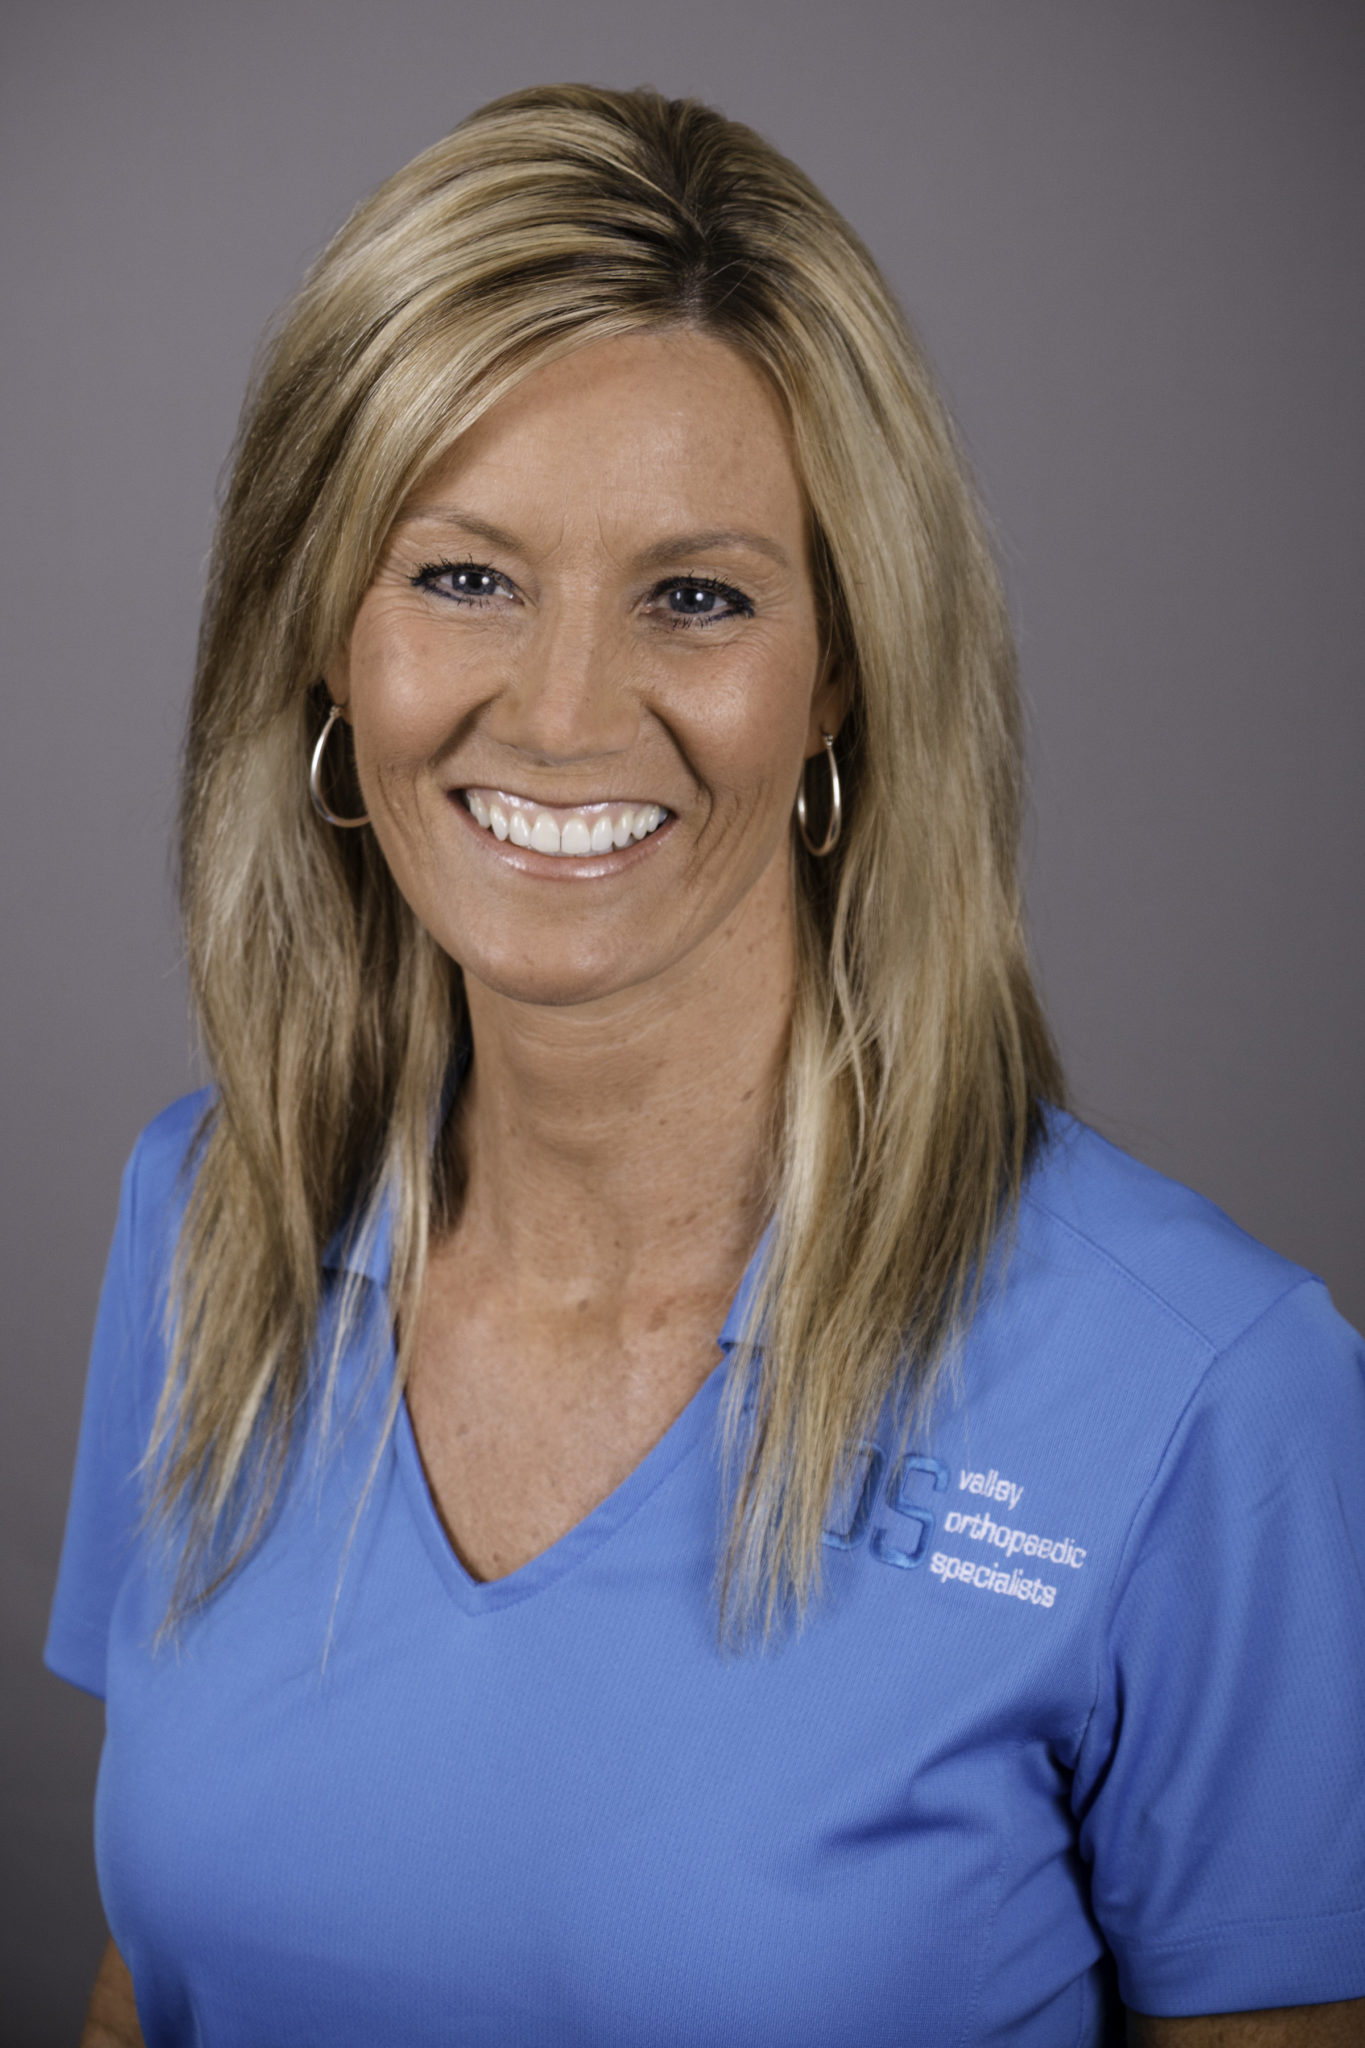 Robin Biondo, PTA - Licensed Physical Therapist Assistant in CT